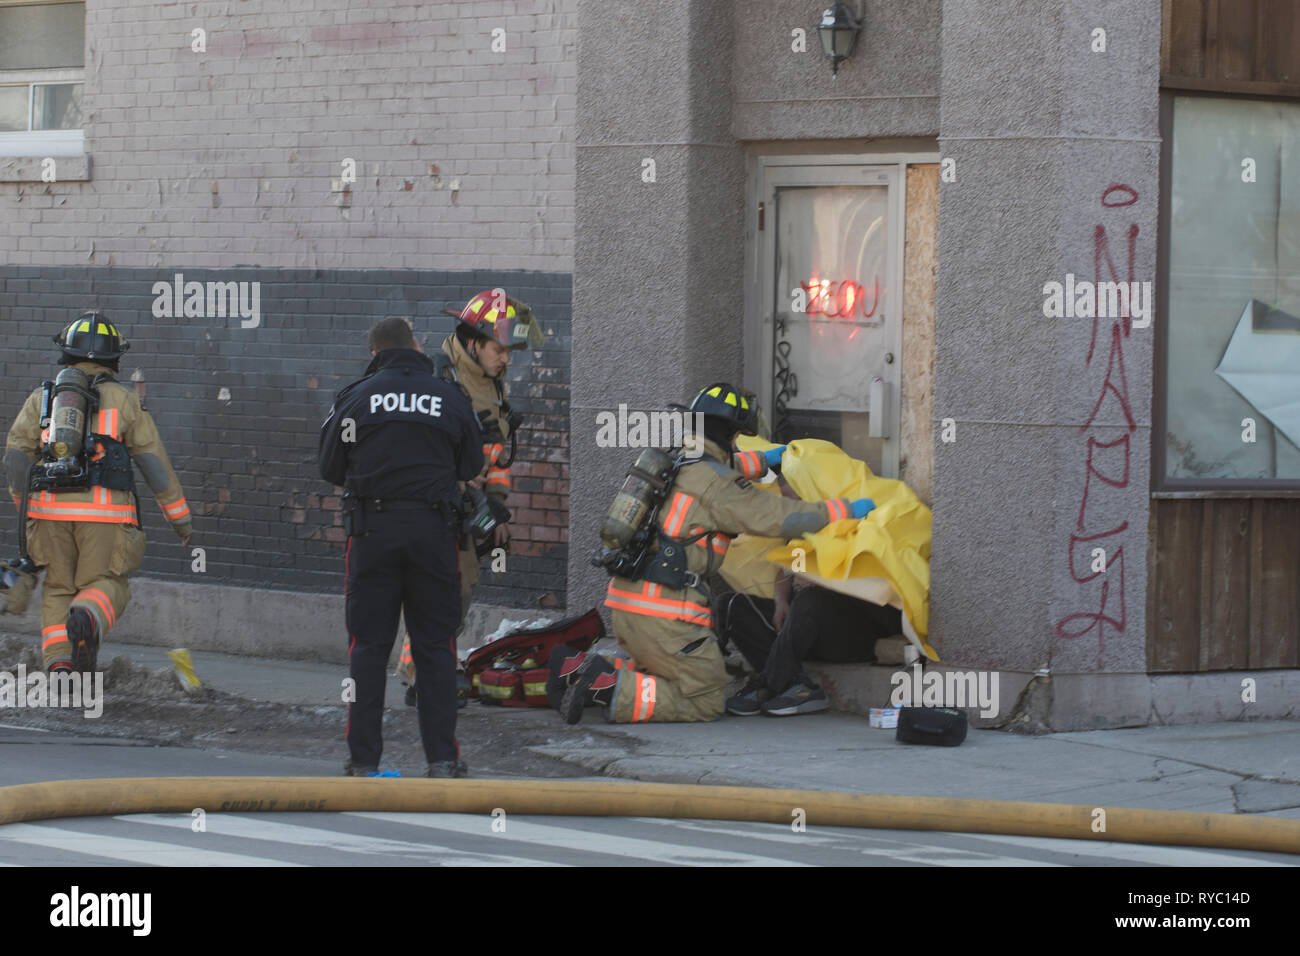 Hamilton, Canada 2019: Firefighters and police attend to a victim of smoke inhalation after an apartment building fire. Rescuing people from a fire. Stock Photo